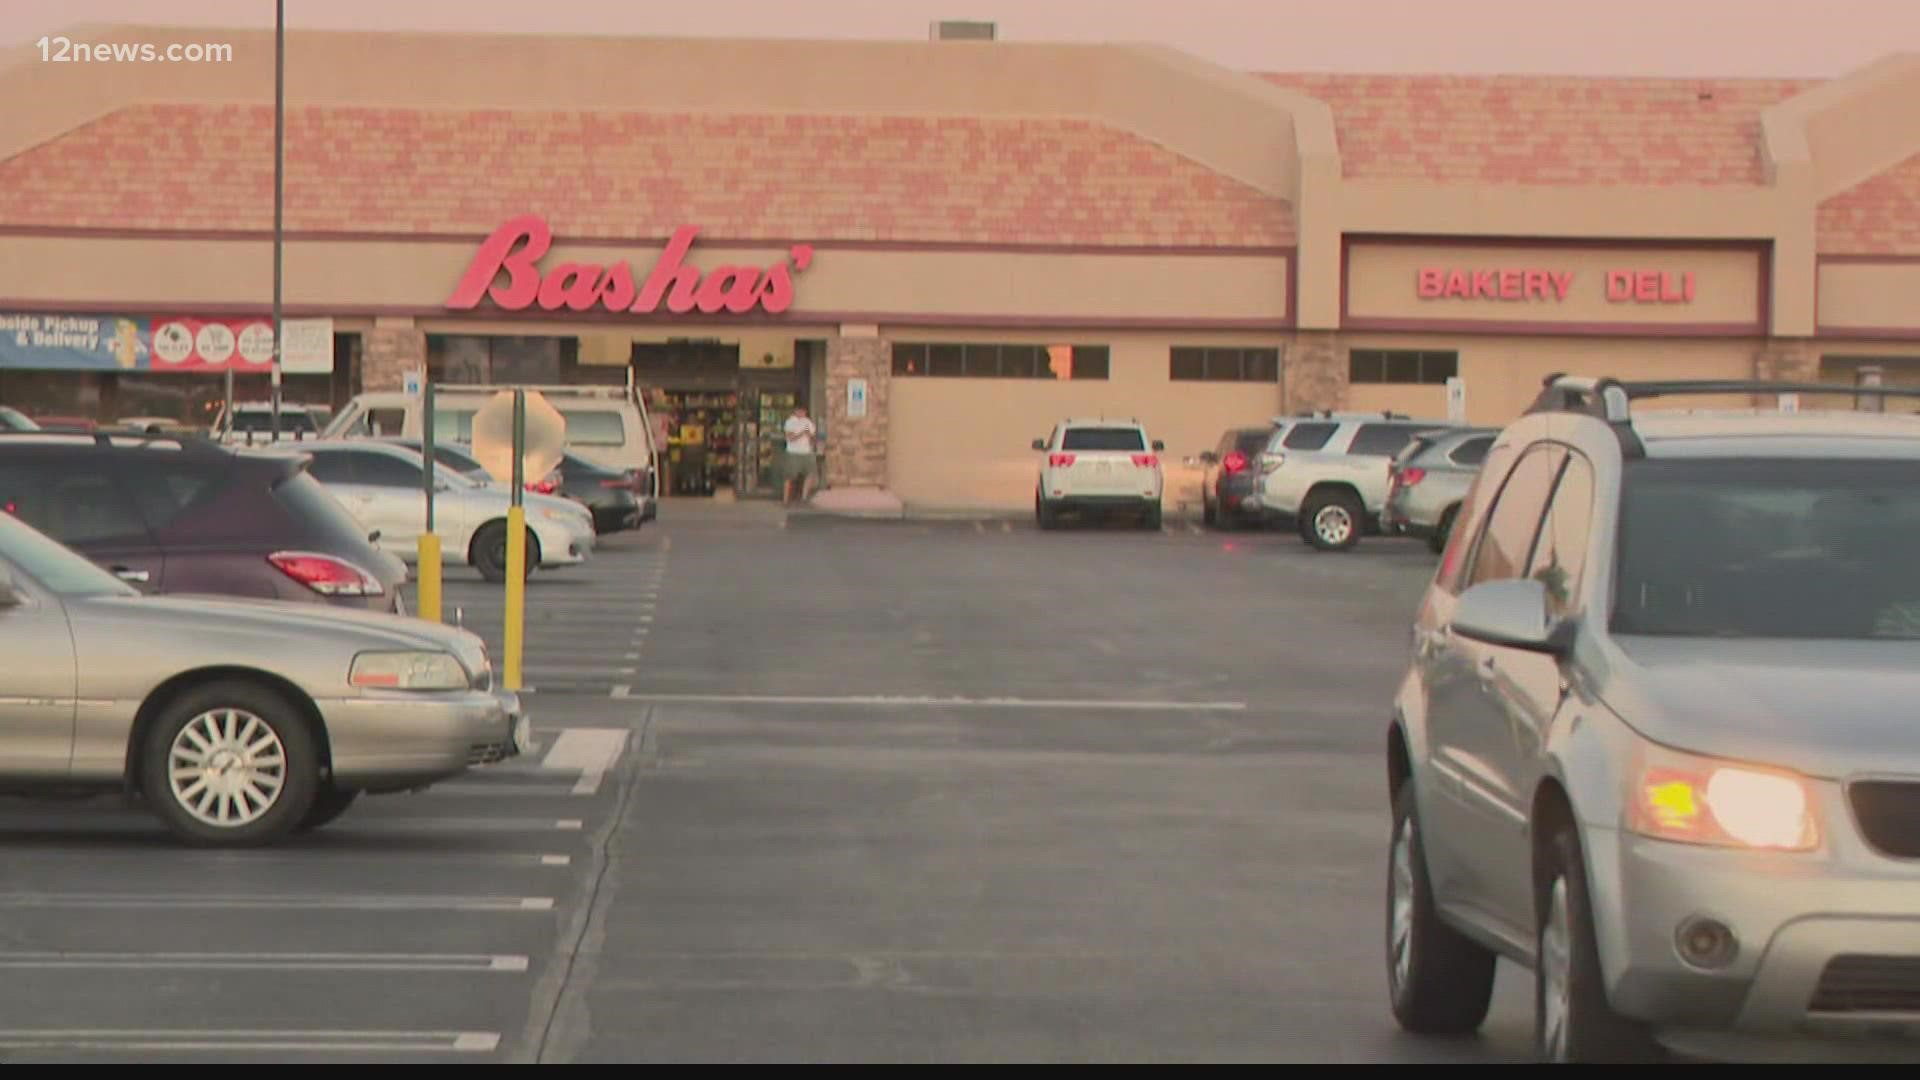 Bashas' family grocery stores announced on Friday that the company has signed a definitive agreement to be acquired by Raley's Holding Company.